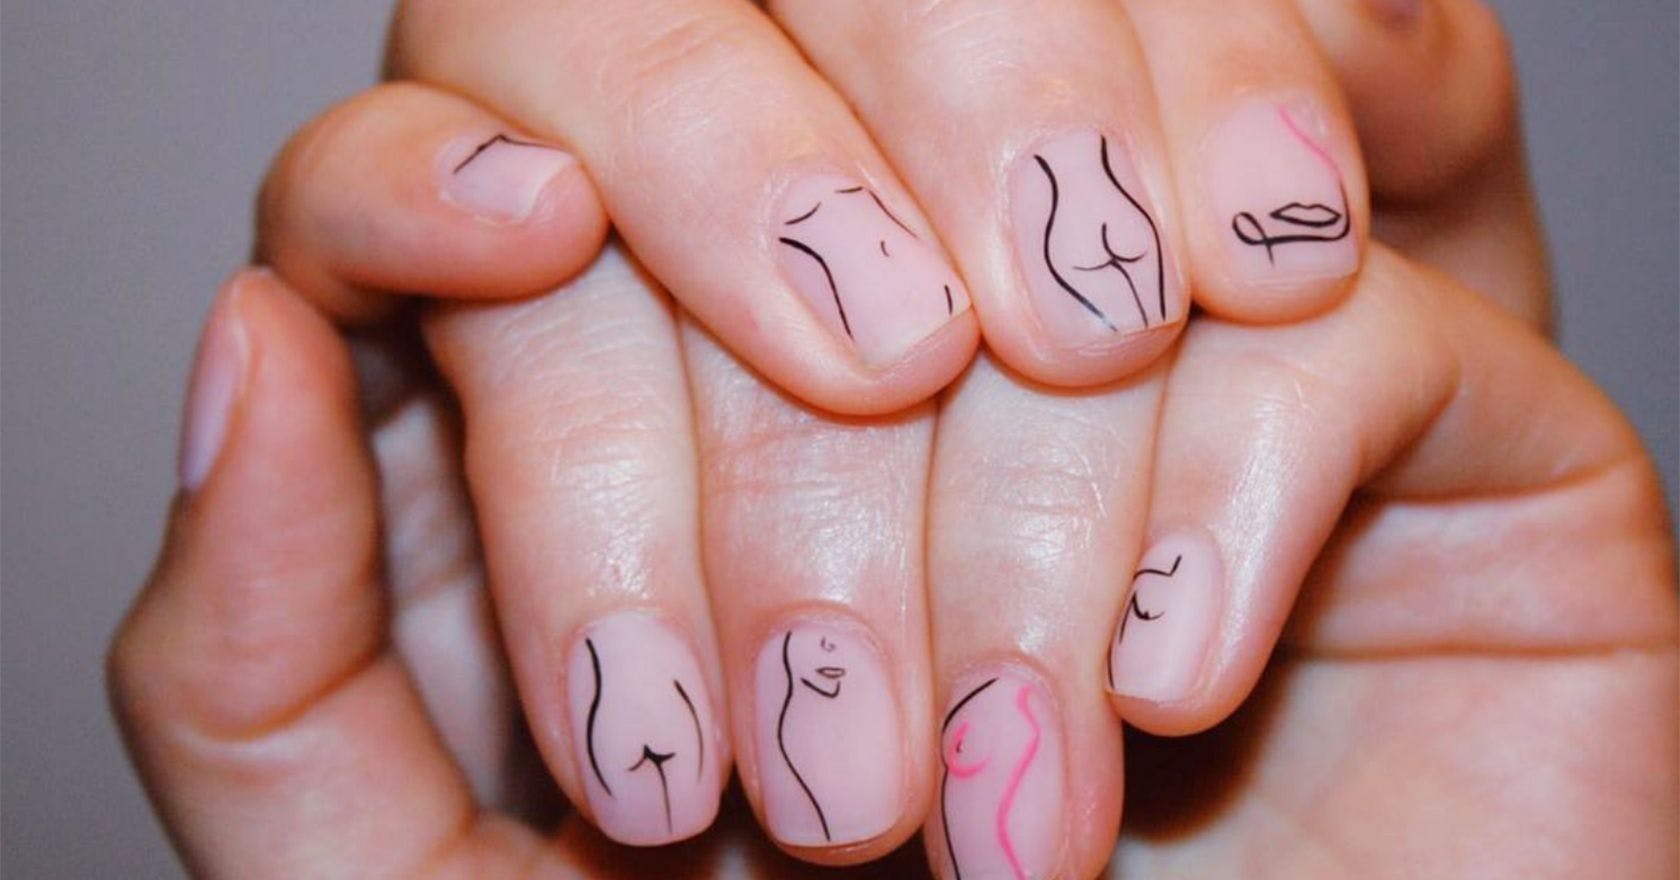 9. Famous Nail Art Salons Around the World - wide 4